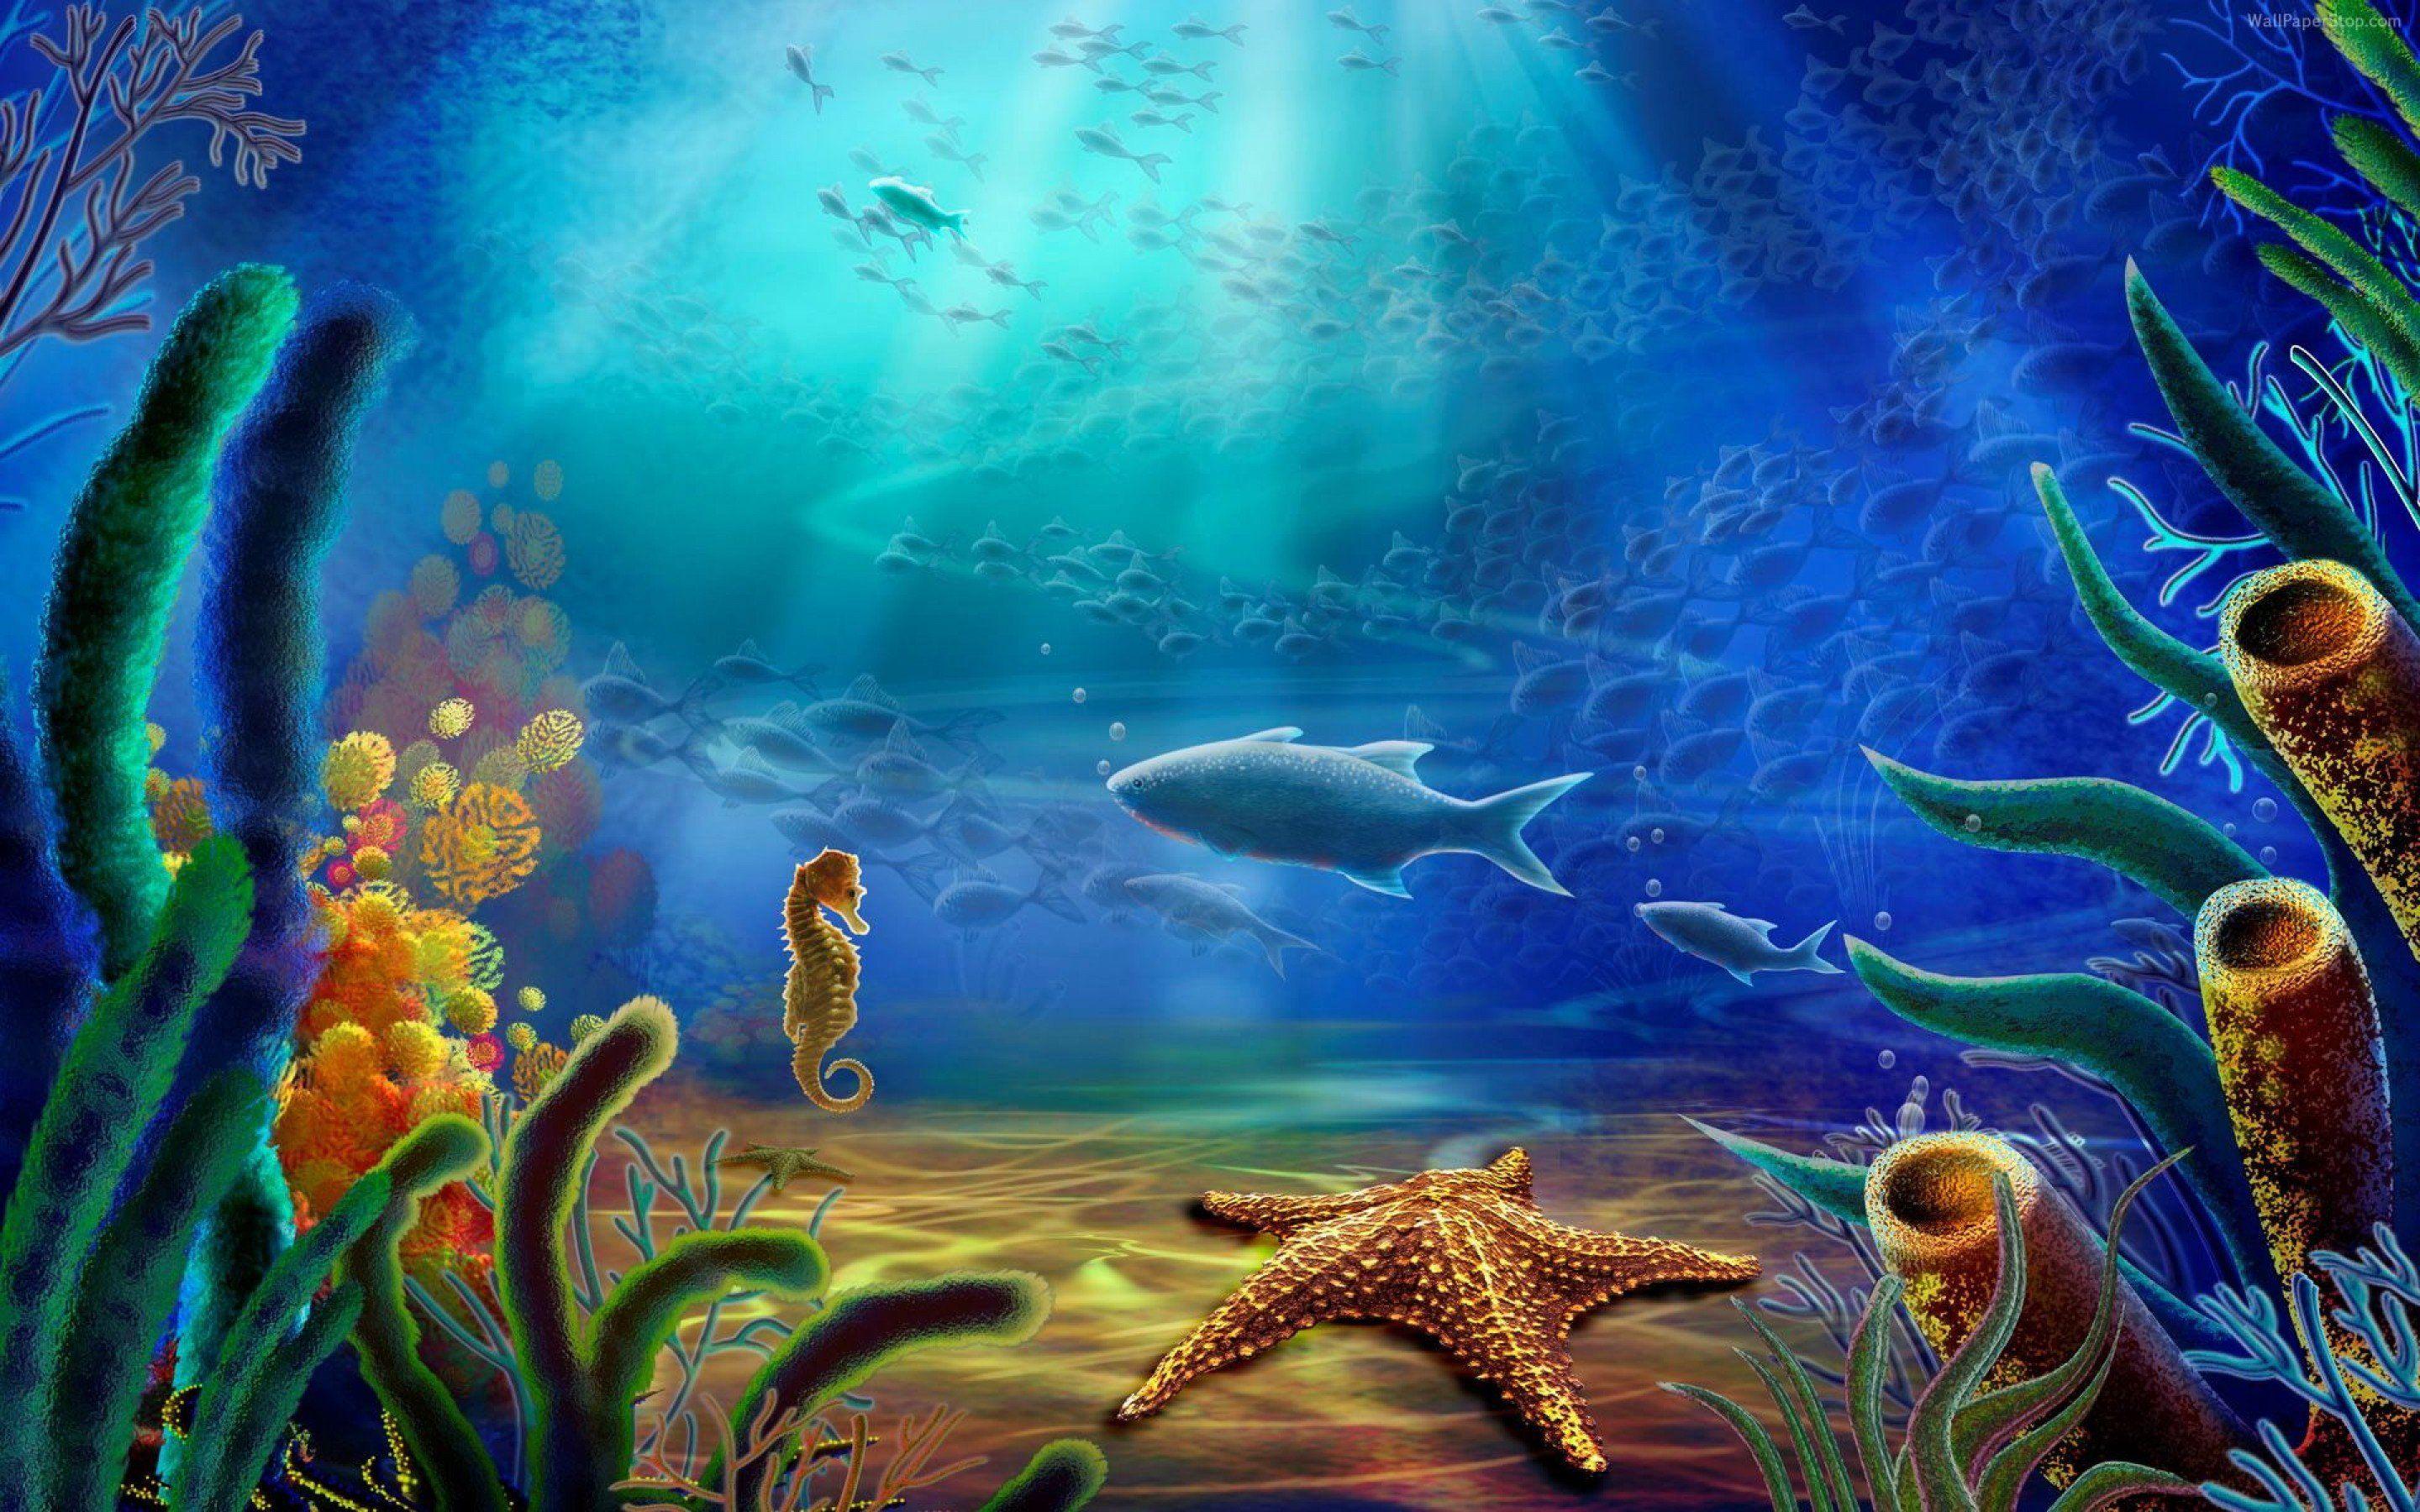 Under Sea Wallpaper, Awesome Under Sea Picture and Wallpaper 48